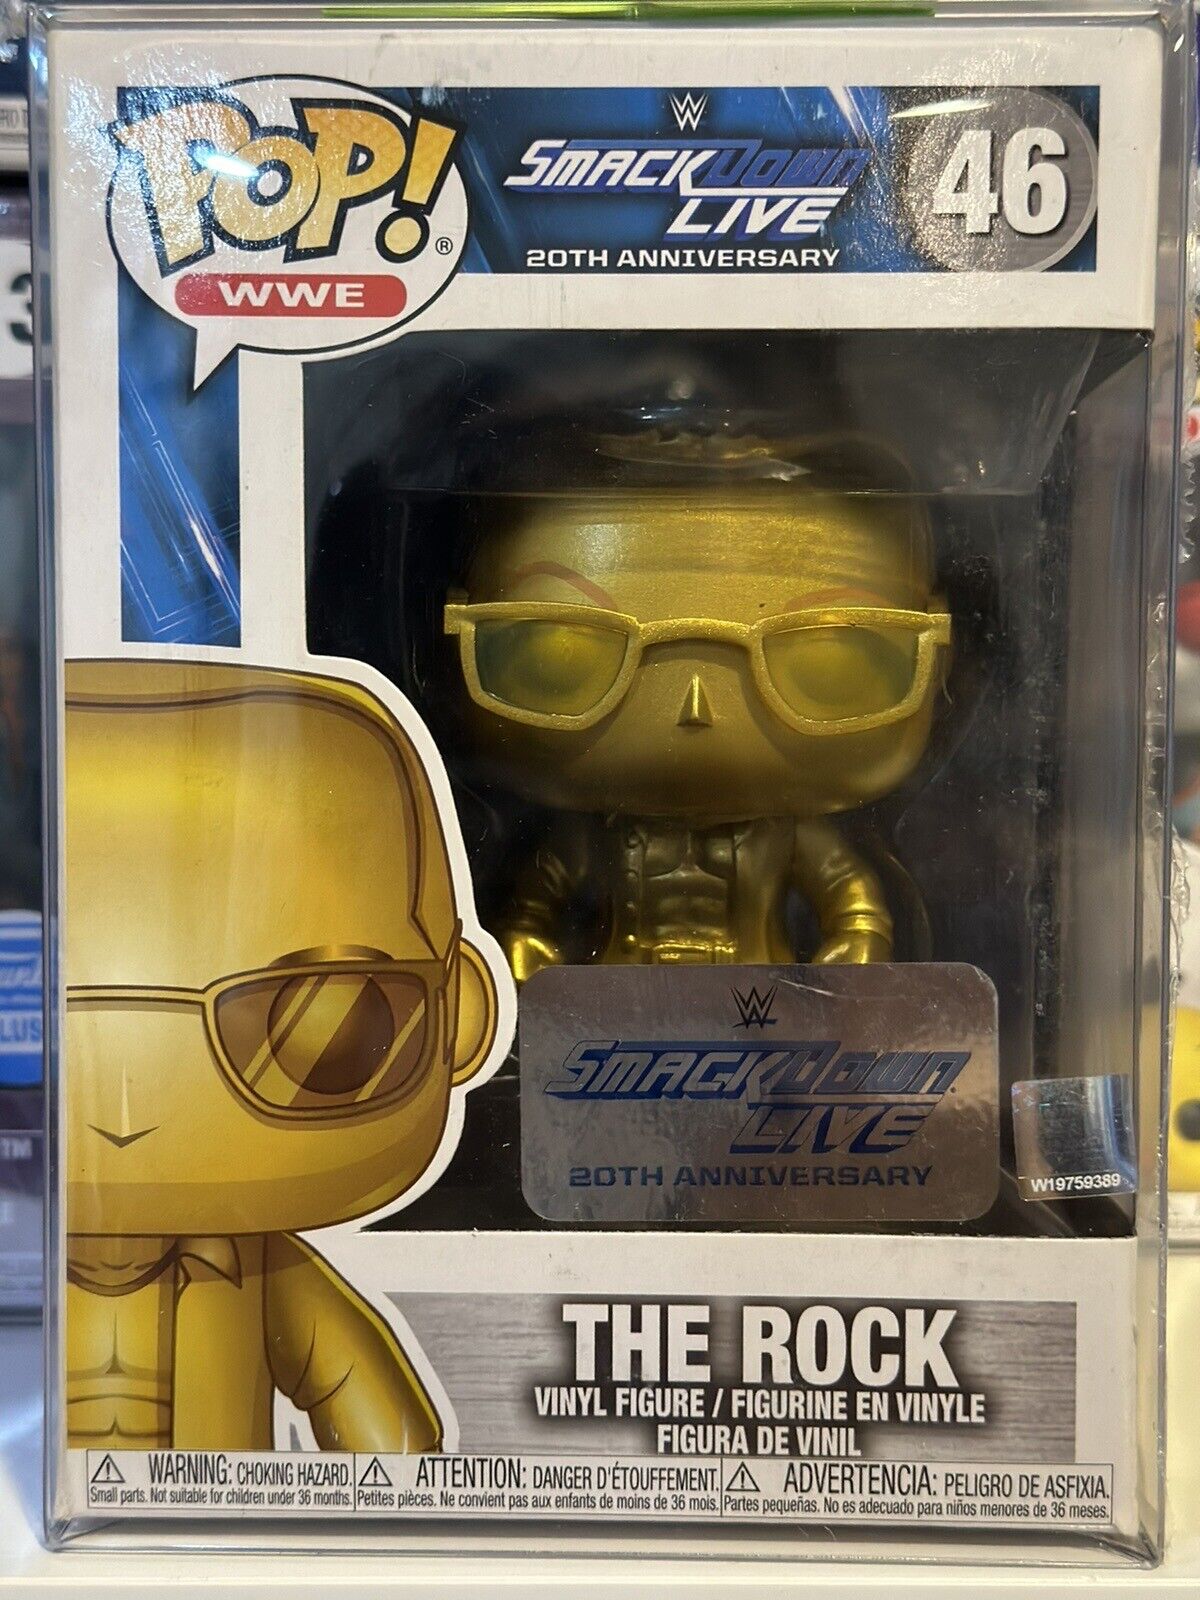 The Rock #46 Gold smack down live 20th Anniversary